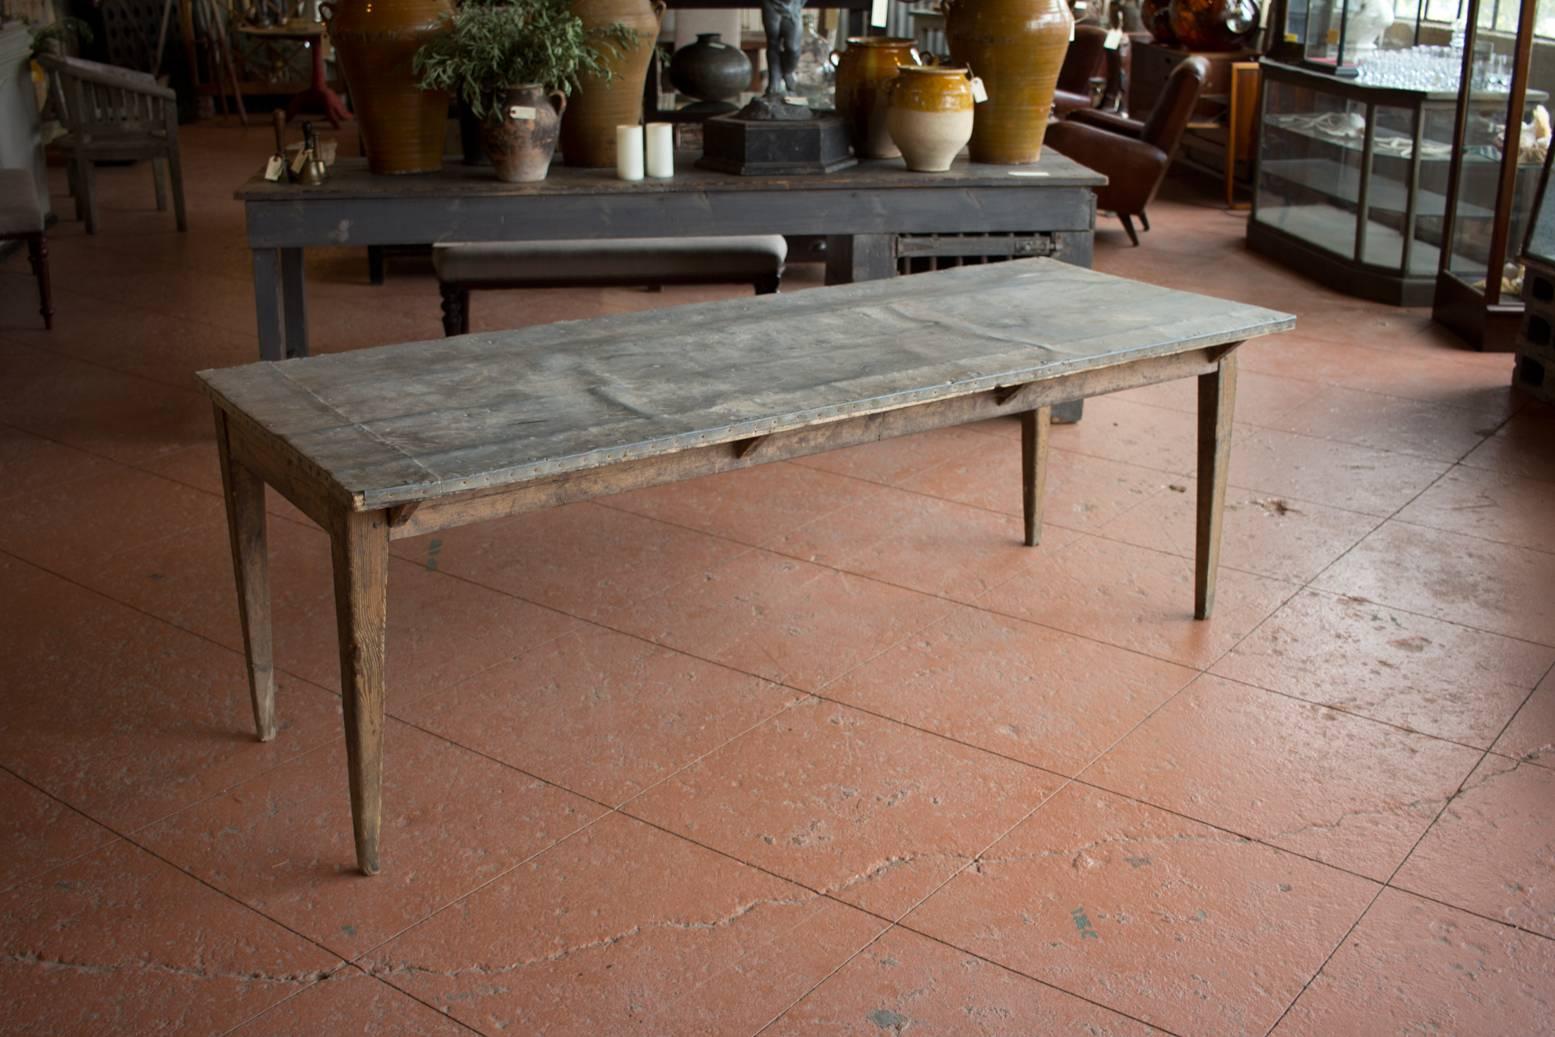 Antique zinc top potting table with pencil legs. Great patina!